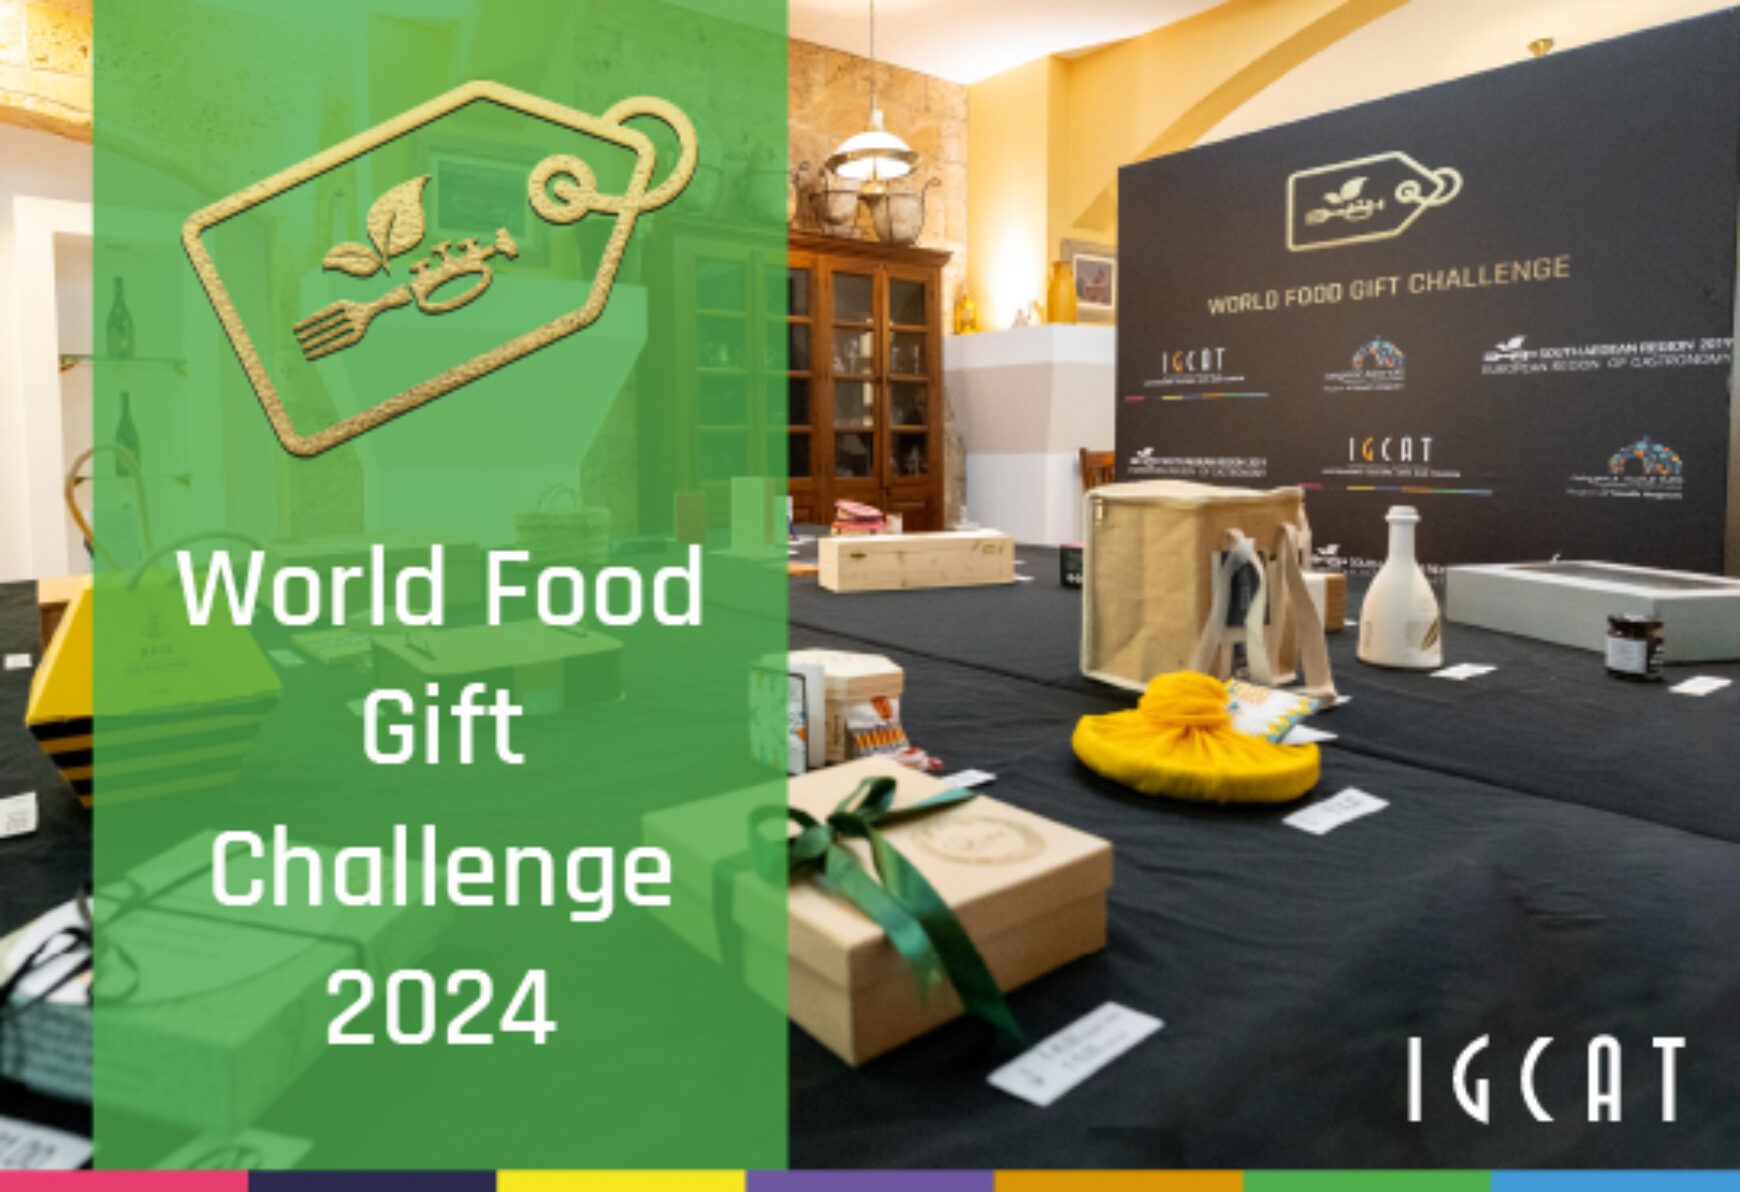 Aseer 2024 to host the 5th World Food Gift Challenge